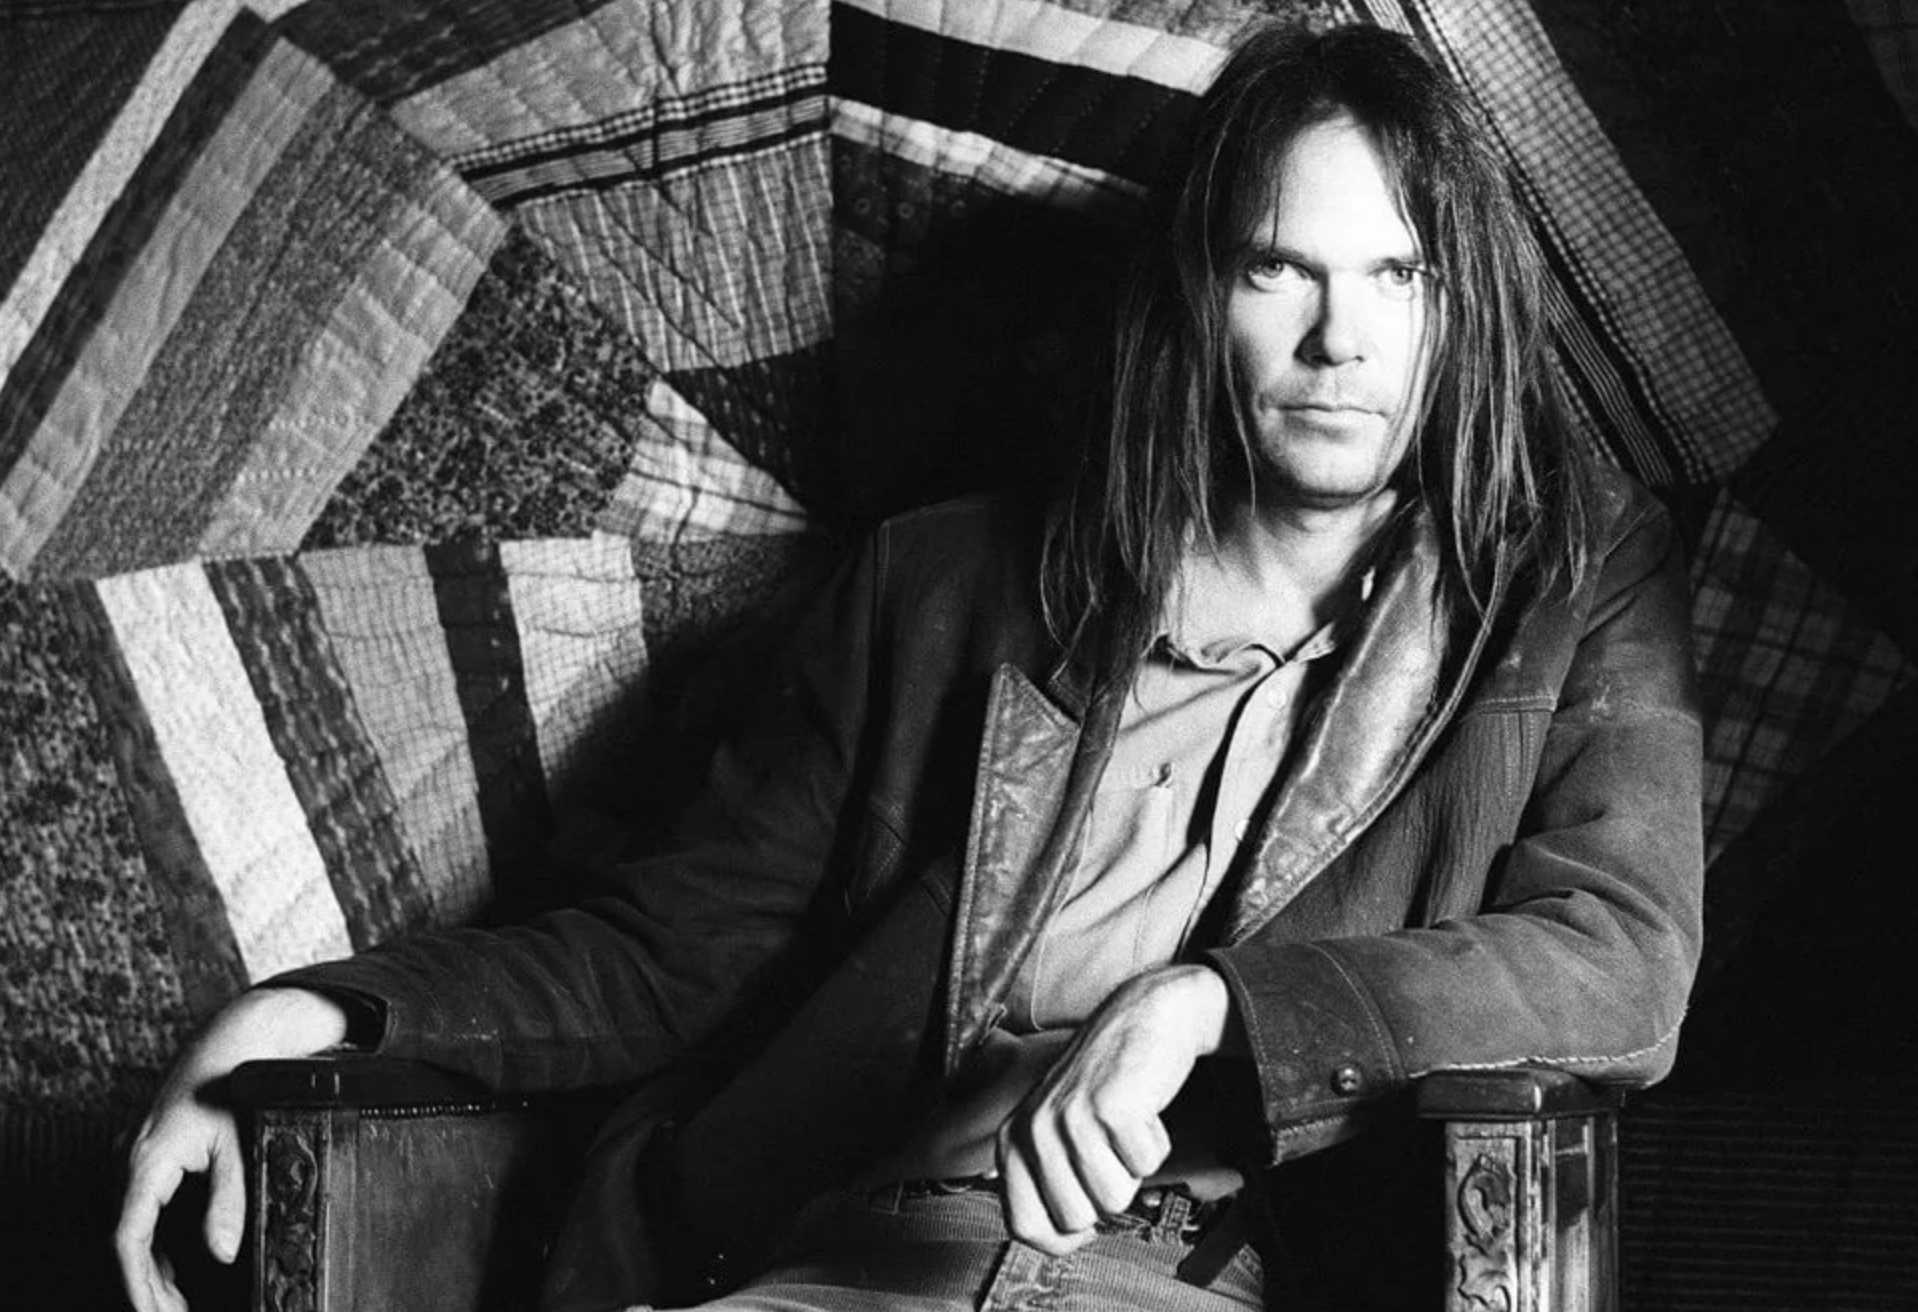 Музыка нилу. Neil young. Neil young в молодости. Neil Percival young. Neil young 1972.